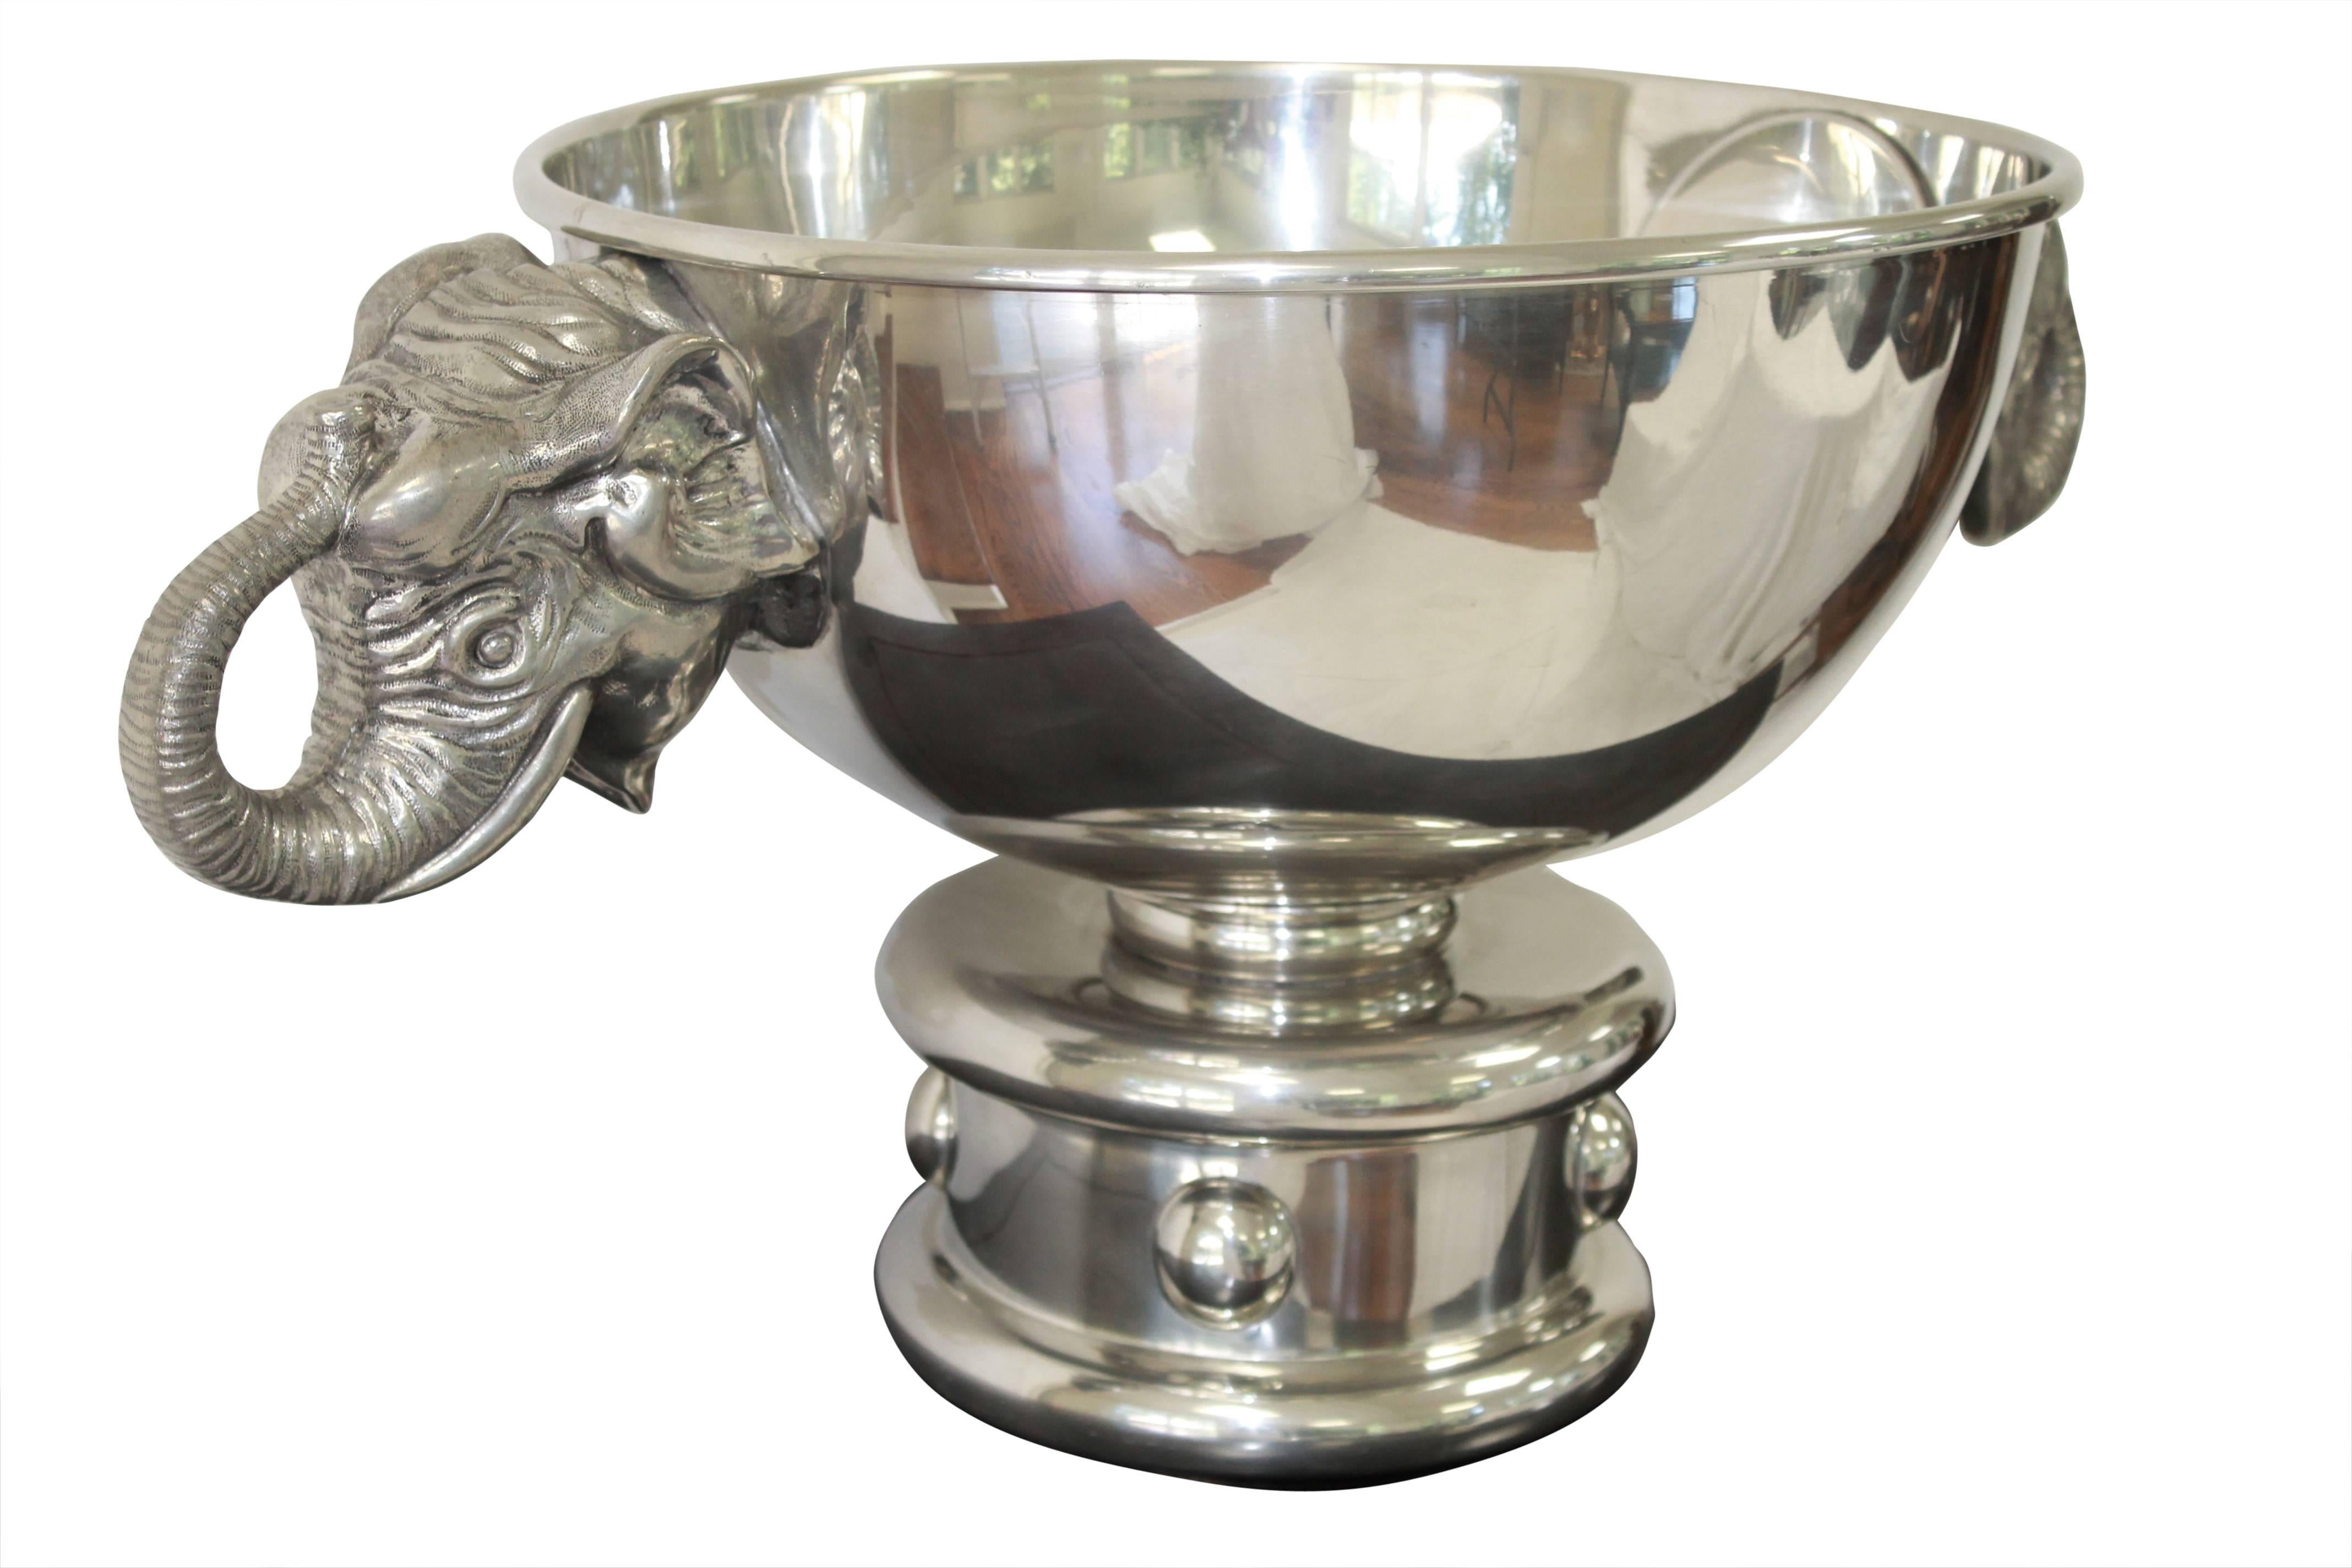 Designed by Figura Piero for Atena, late 20th century. Silver plated pewter champagne cooler in the form of a circus drum supporting the bowl, with elephant mask handles. Stamp to the bottom. Made in Italy. (Identical piece sold; ref. Christies